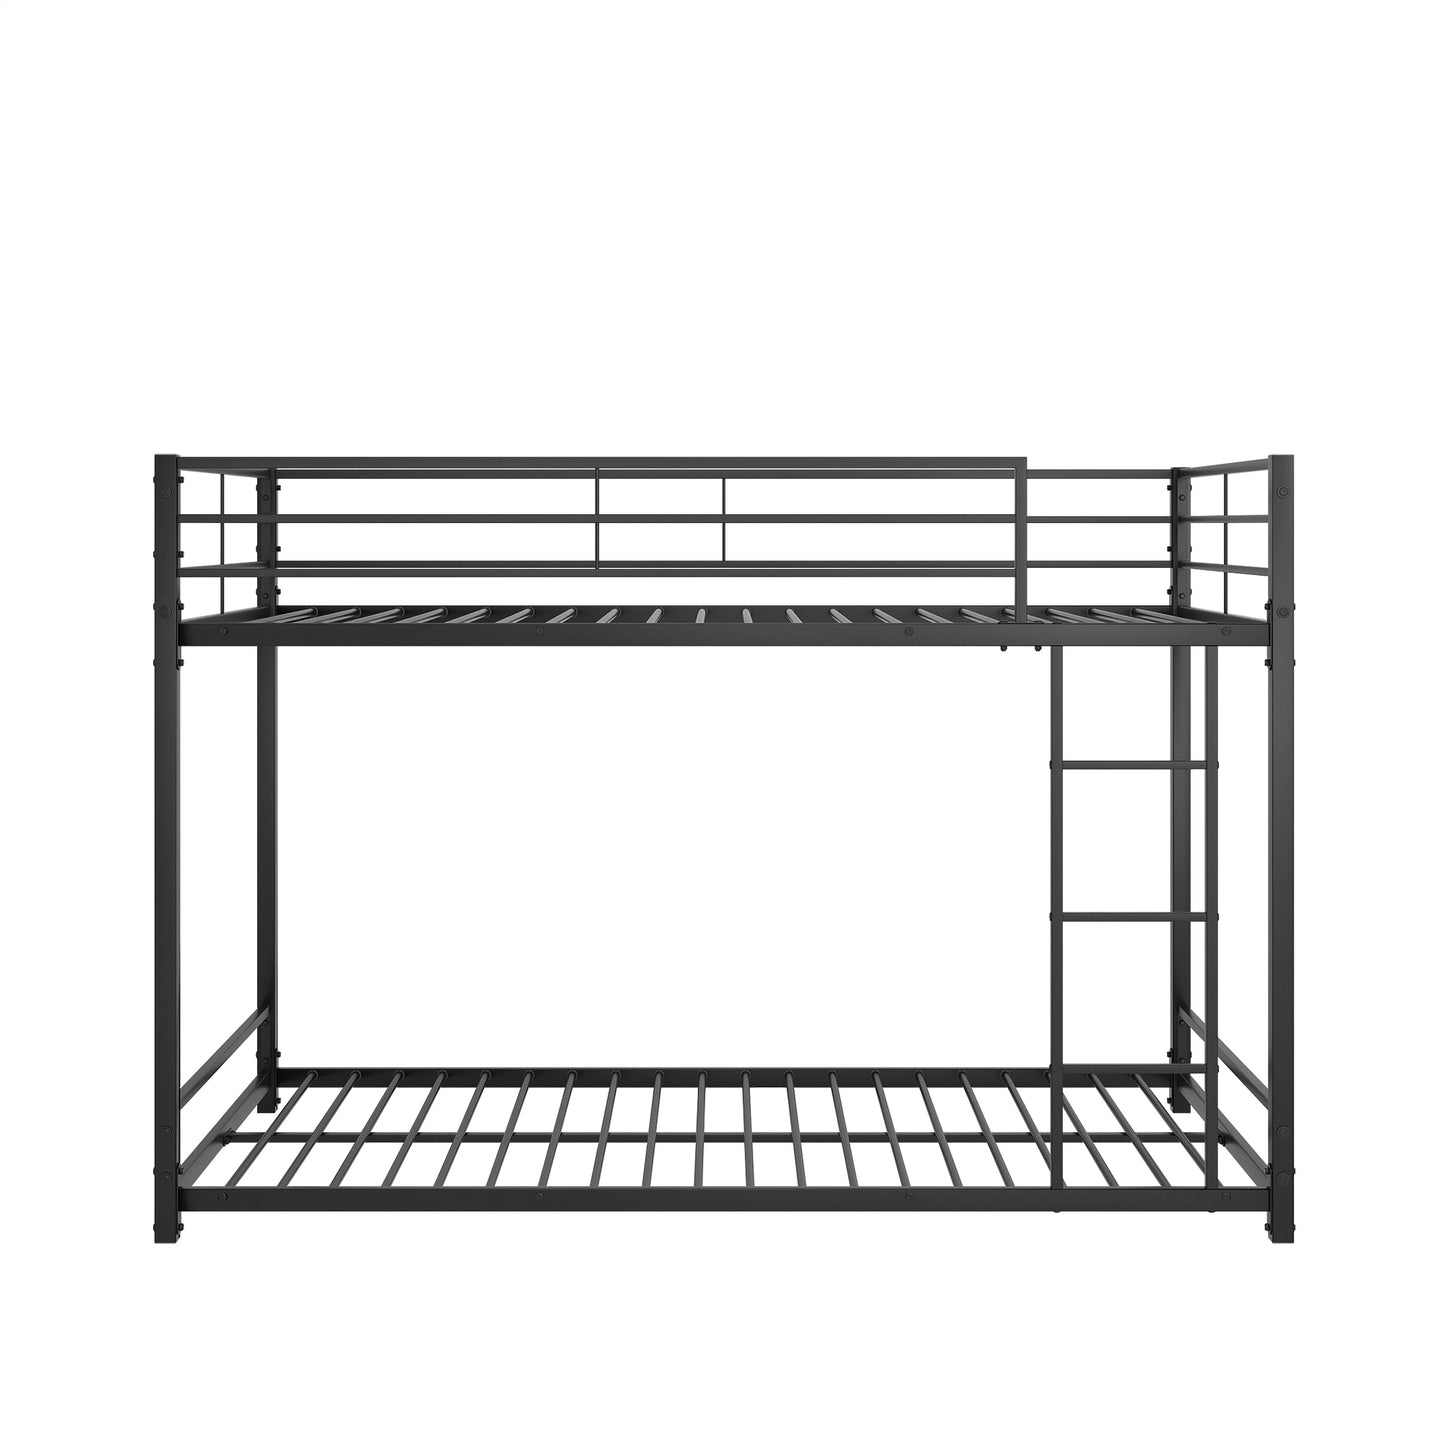 Metal Bunk Bed Twin Over Twin, Bunk Bed Frame with Safety Guard Rails, Heavy Duty Space-Saving Design, Easy Assembly Black